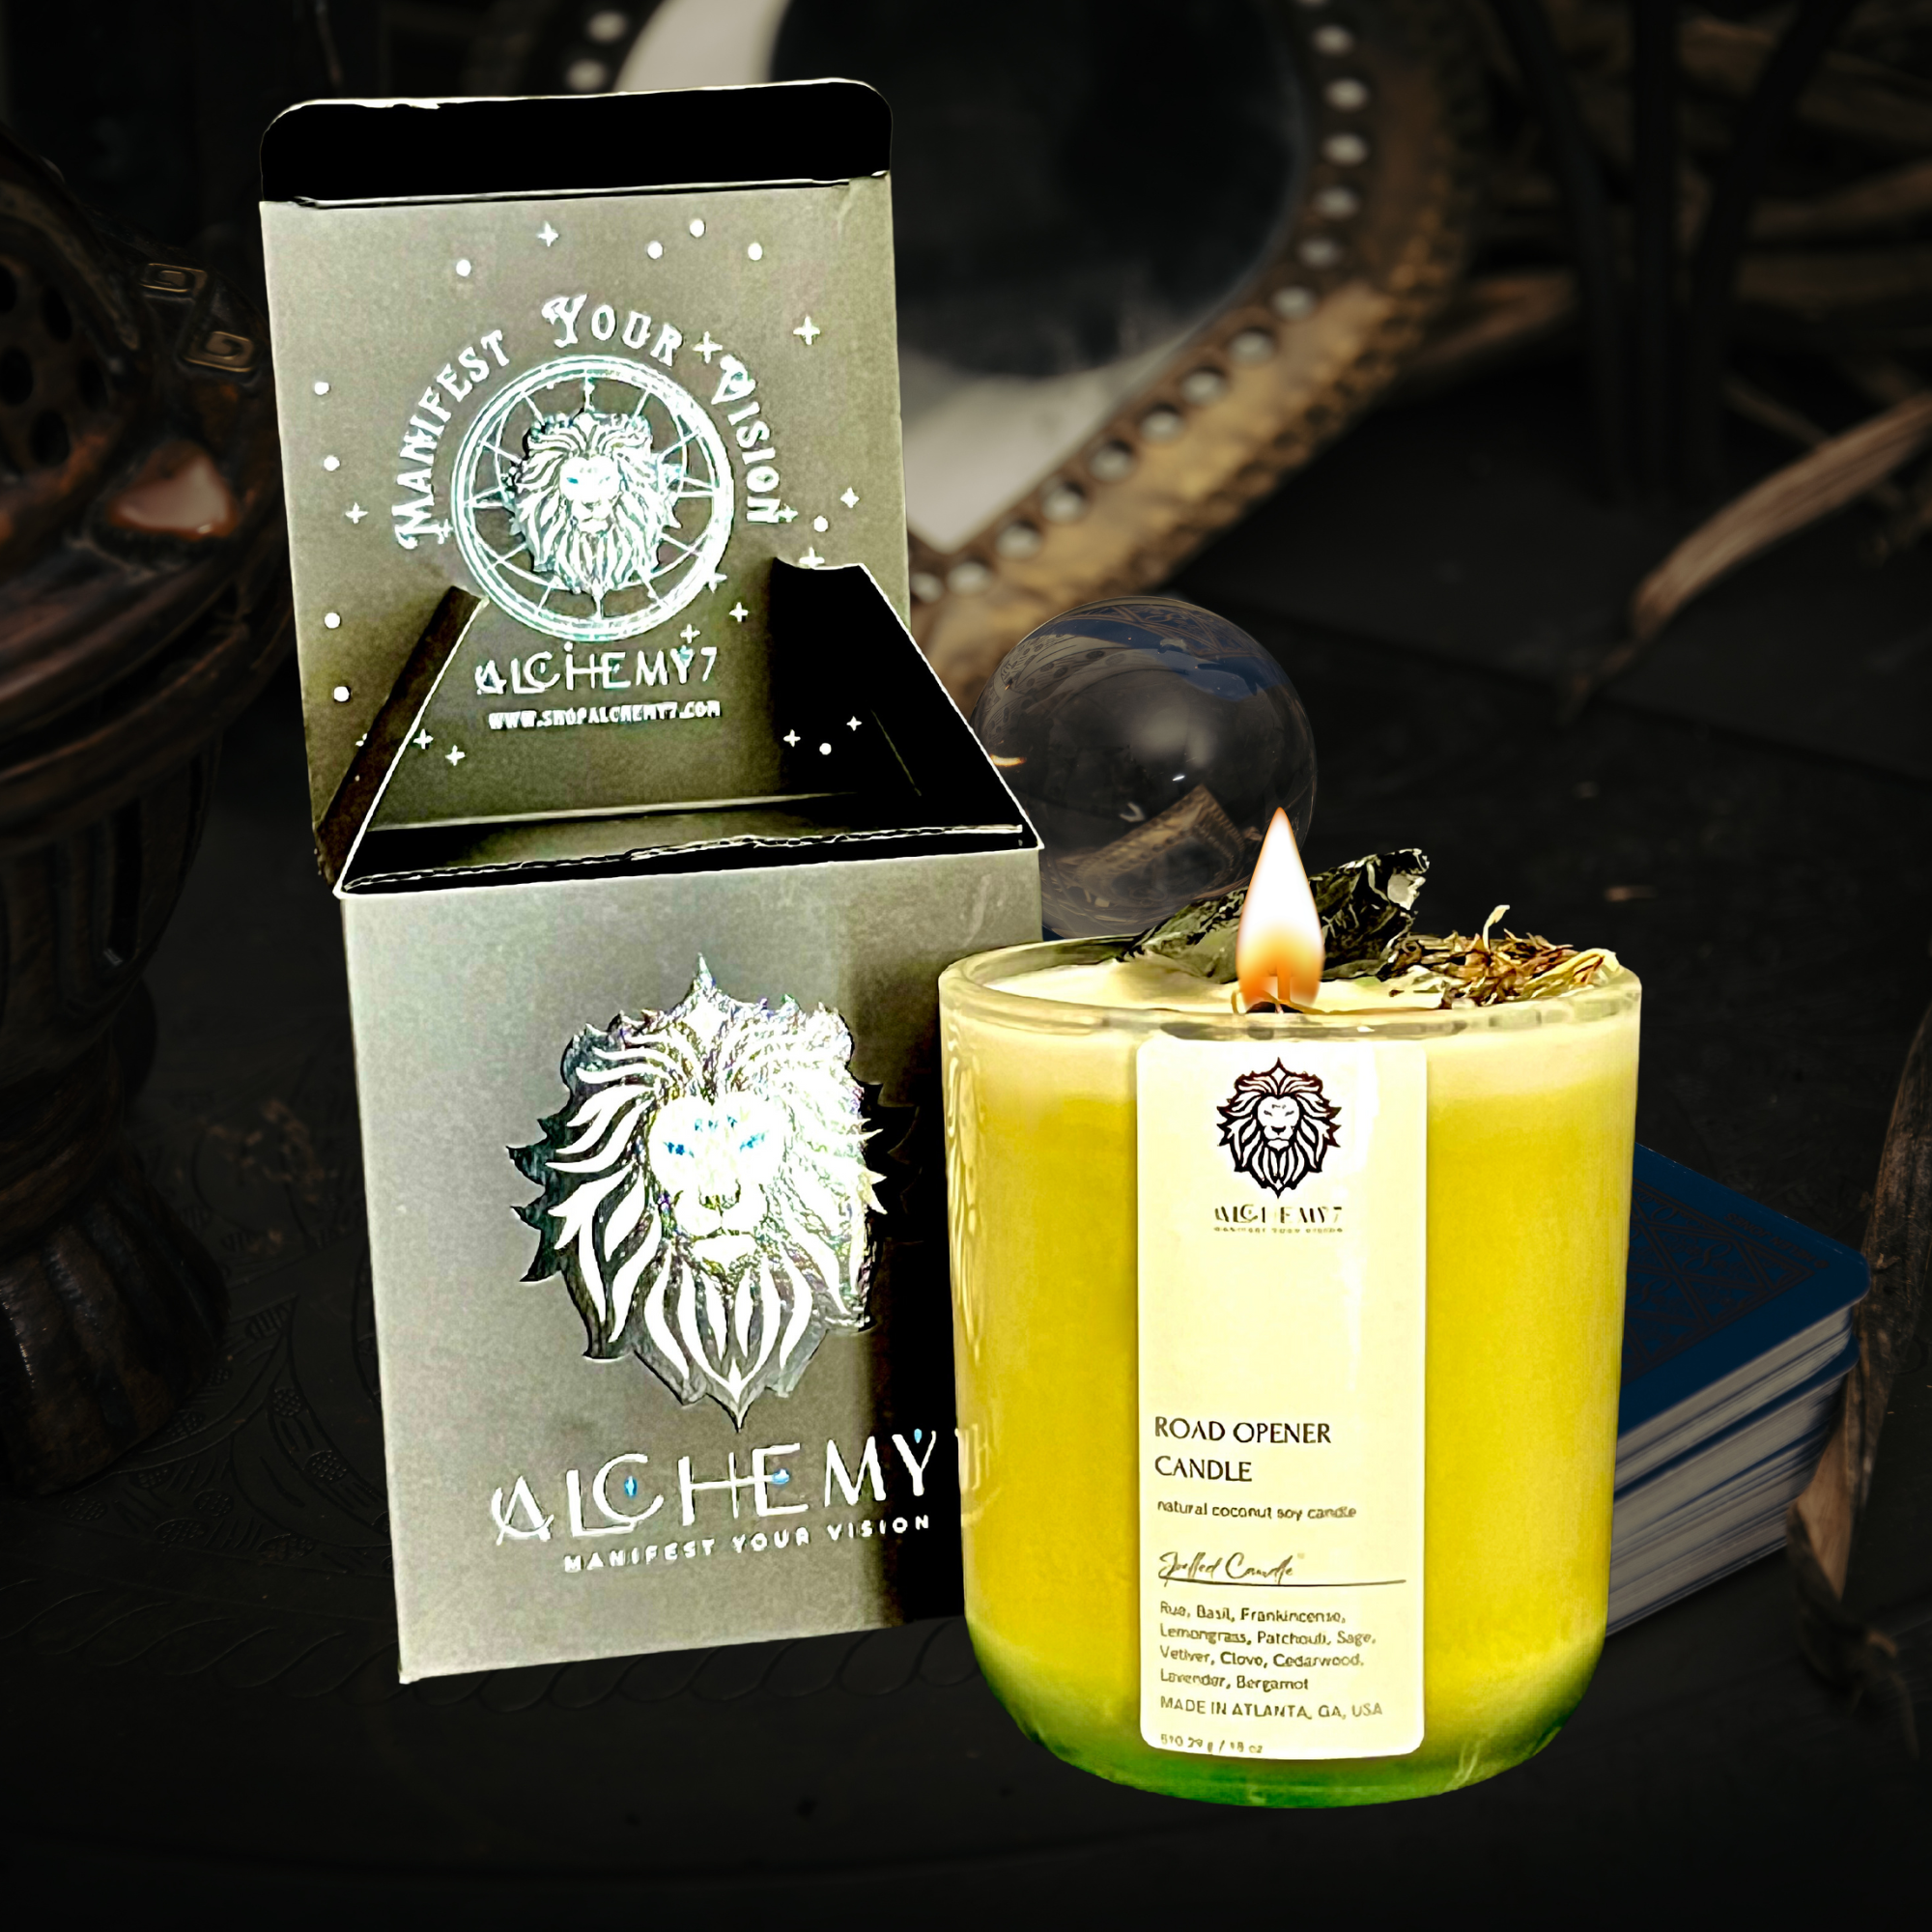 Alchemy7 | Road Opener Spell Candle - Clear the Path to Prosperity - Abre Camino - Magick Candle